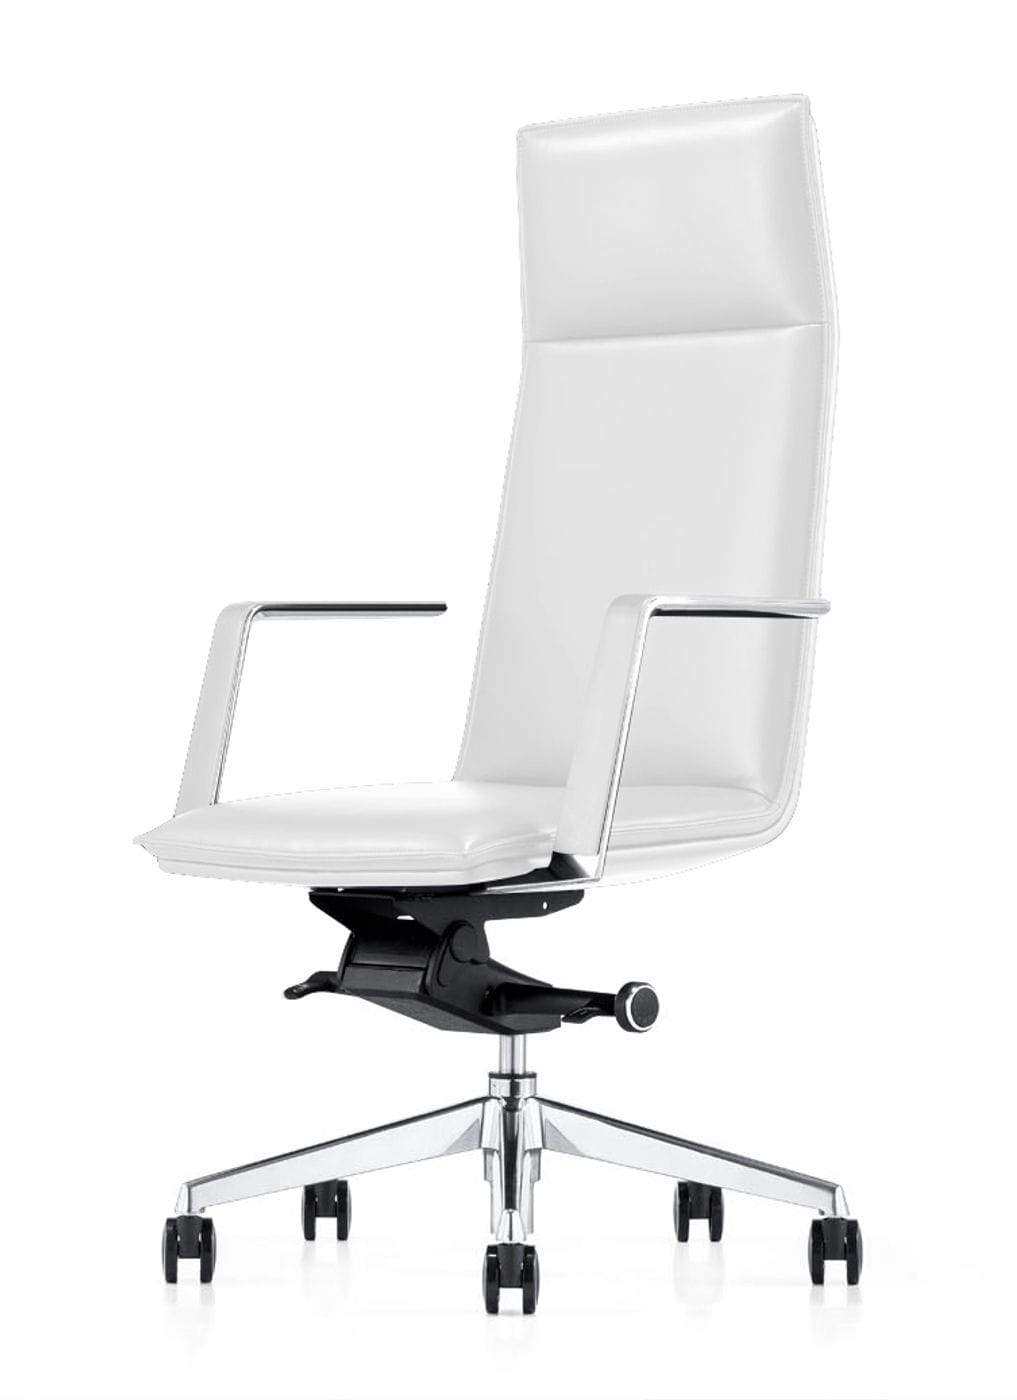 VIG Furniture Modrest Gorsky White High Back Executive Office Chair